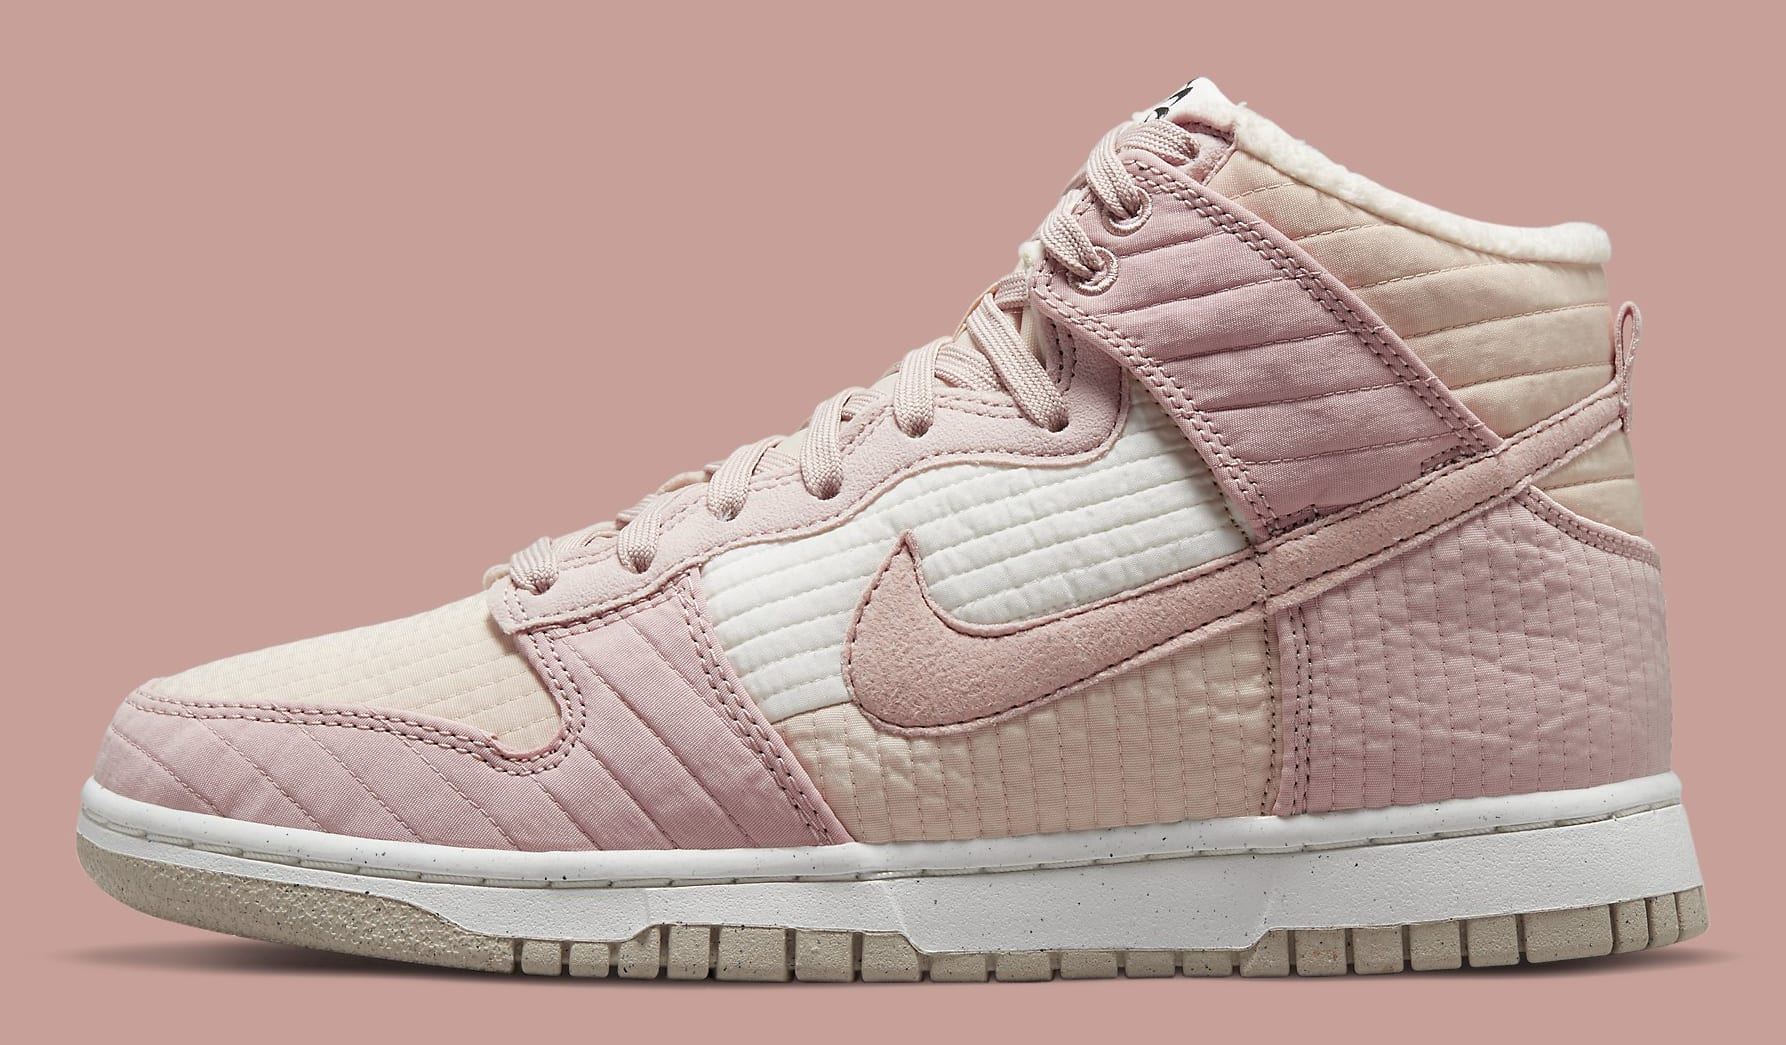 These Nike Dunk Highs Will Keep Your Feet 'Toasty' This Winter